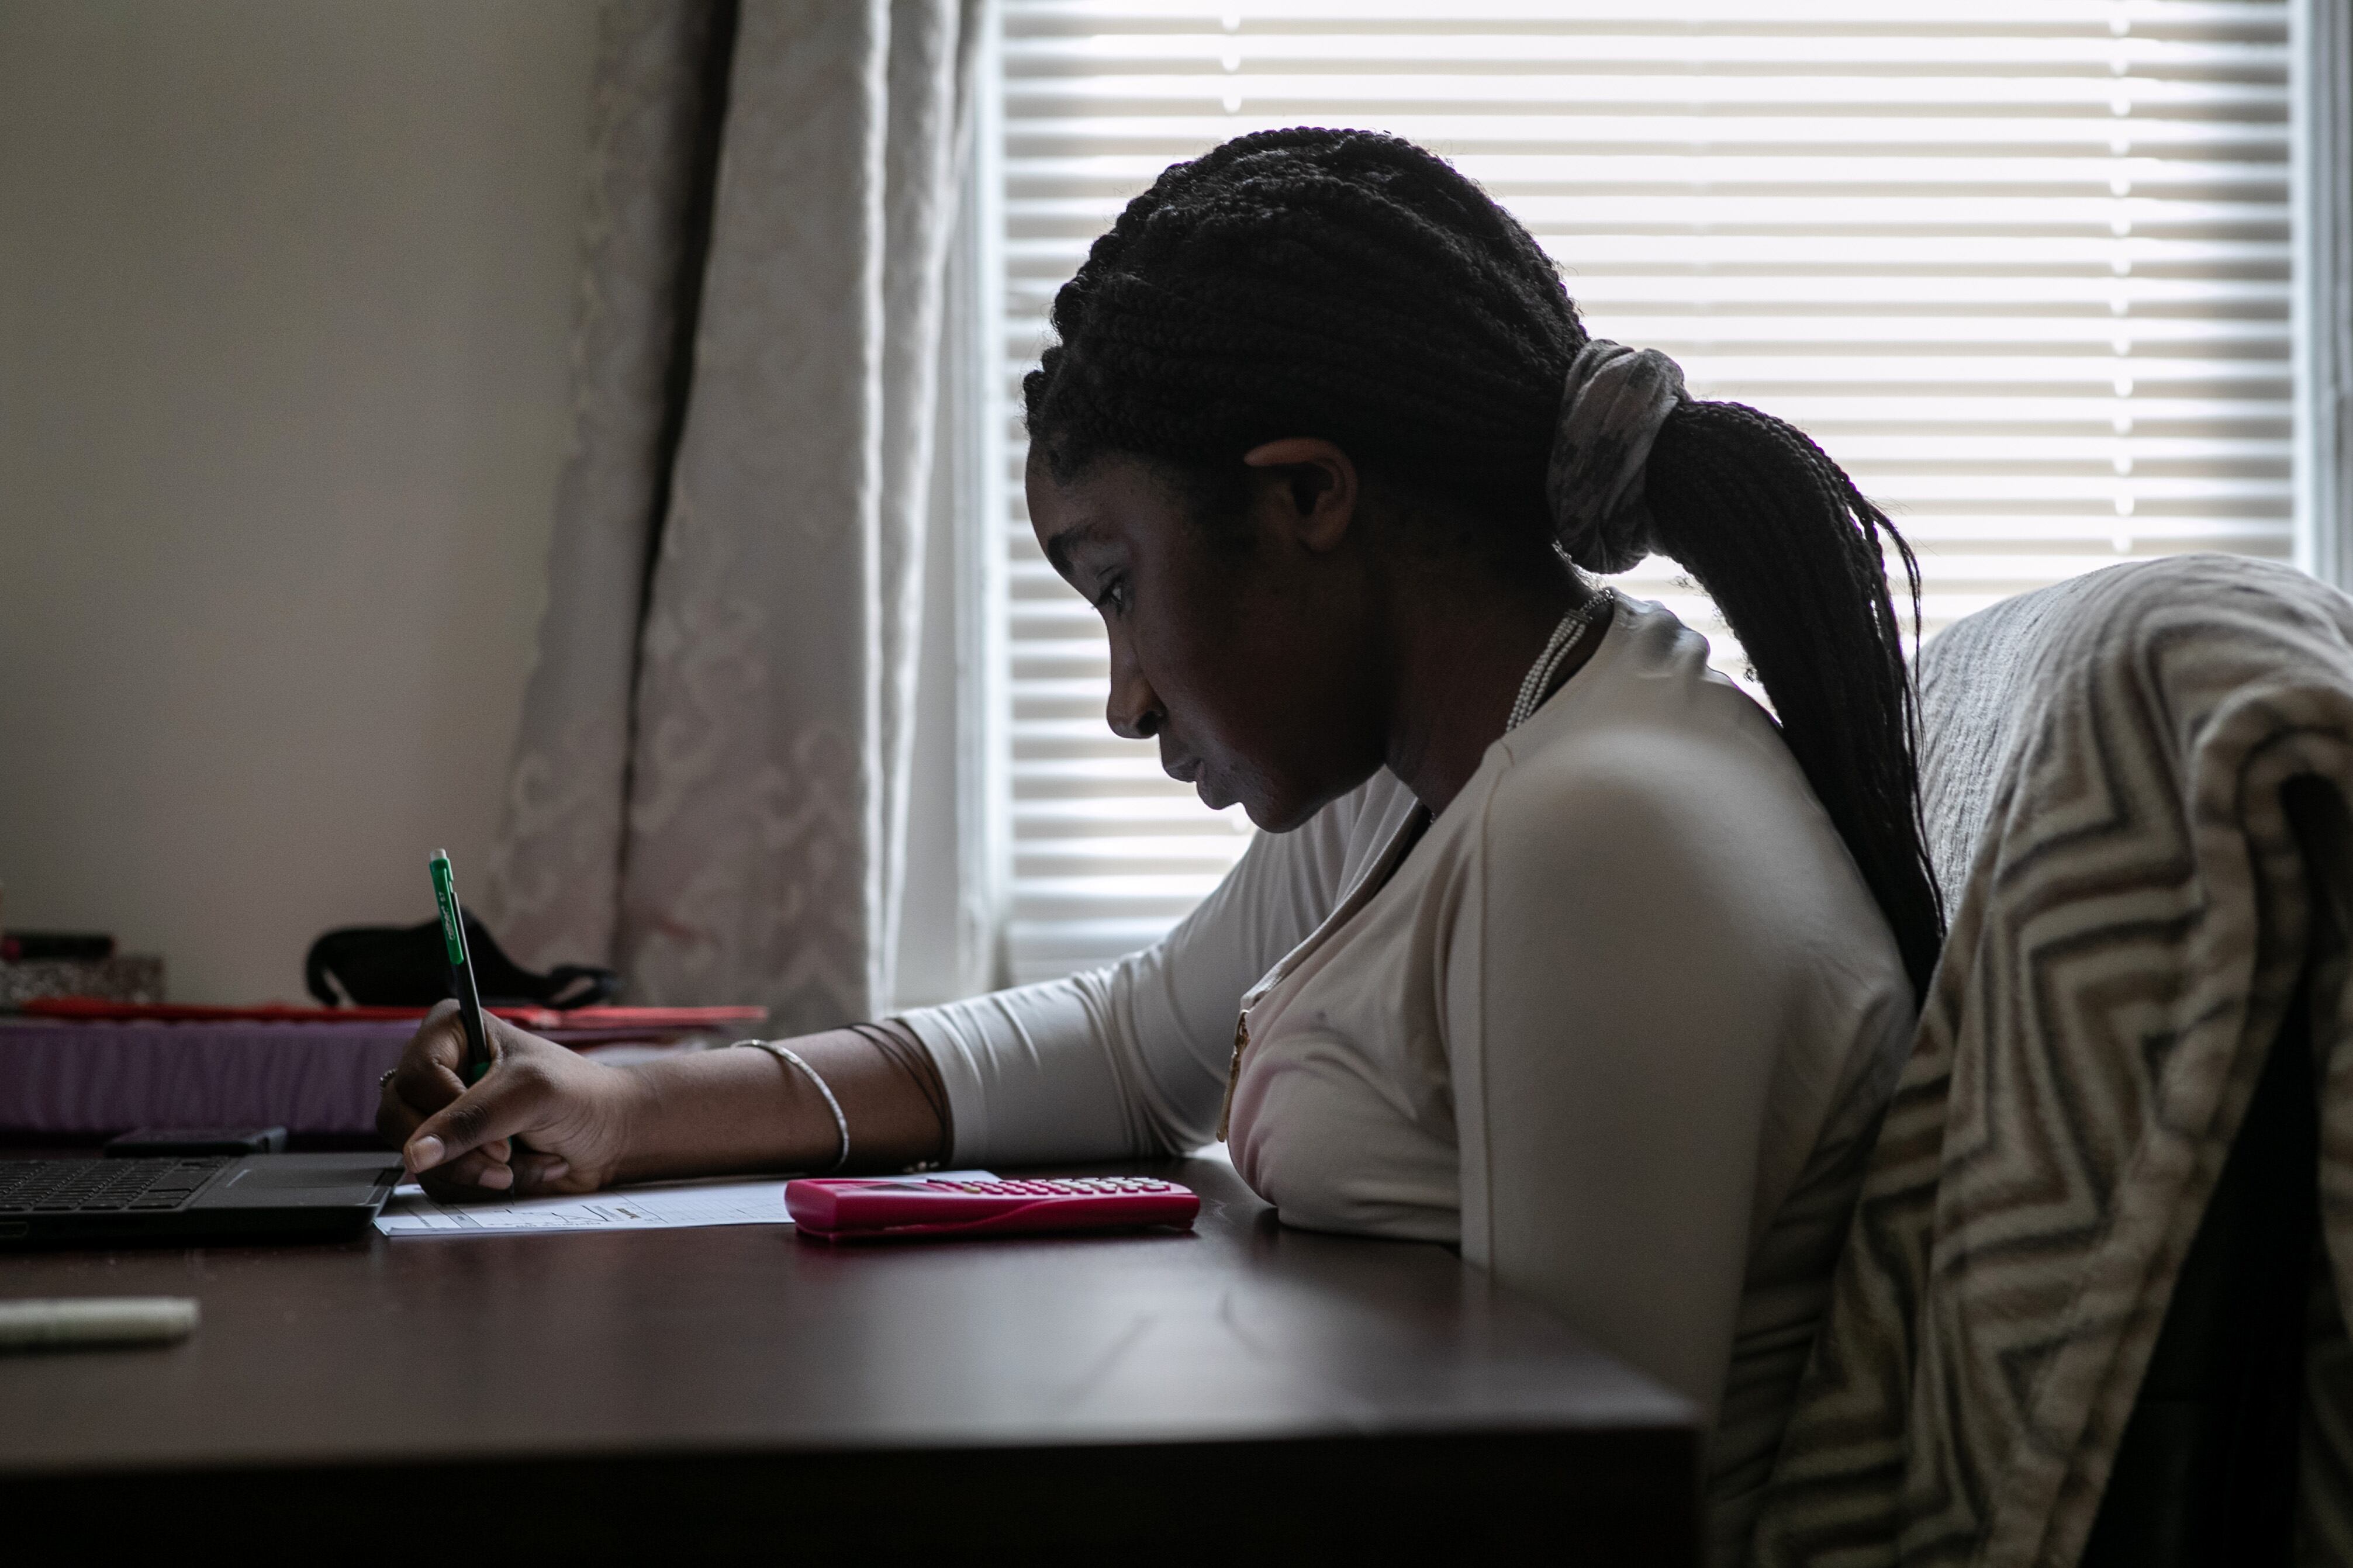 A teenage girl with braided hair takes notes while virtually learning at her desk.